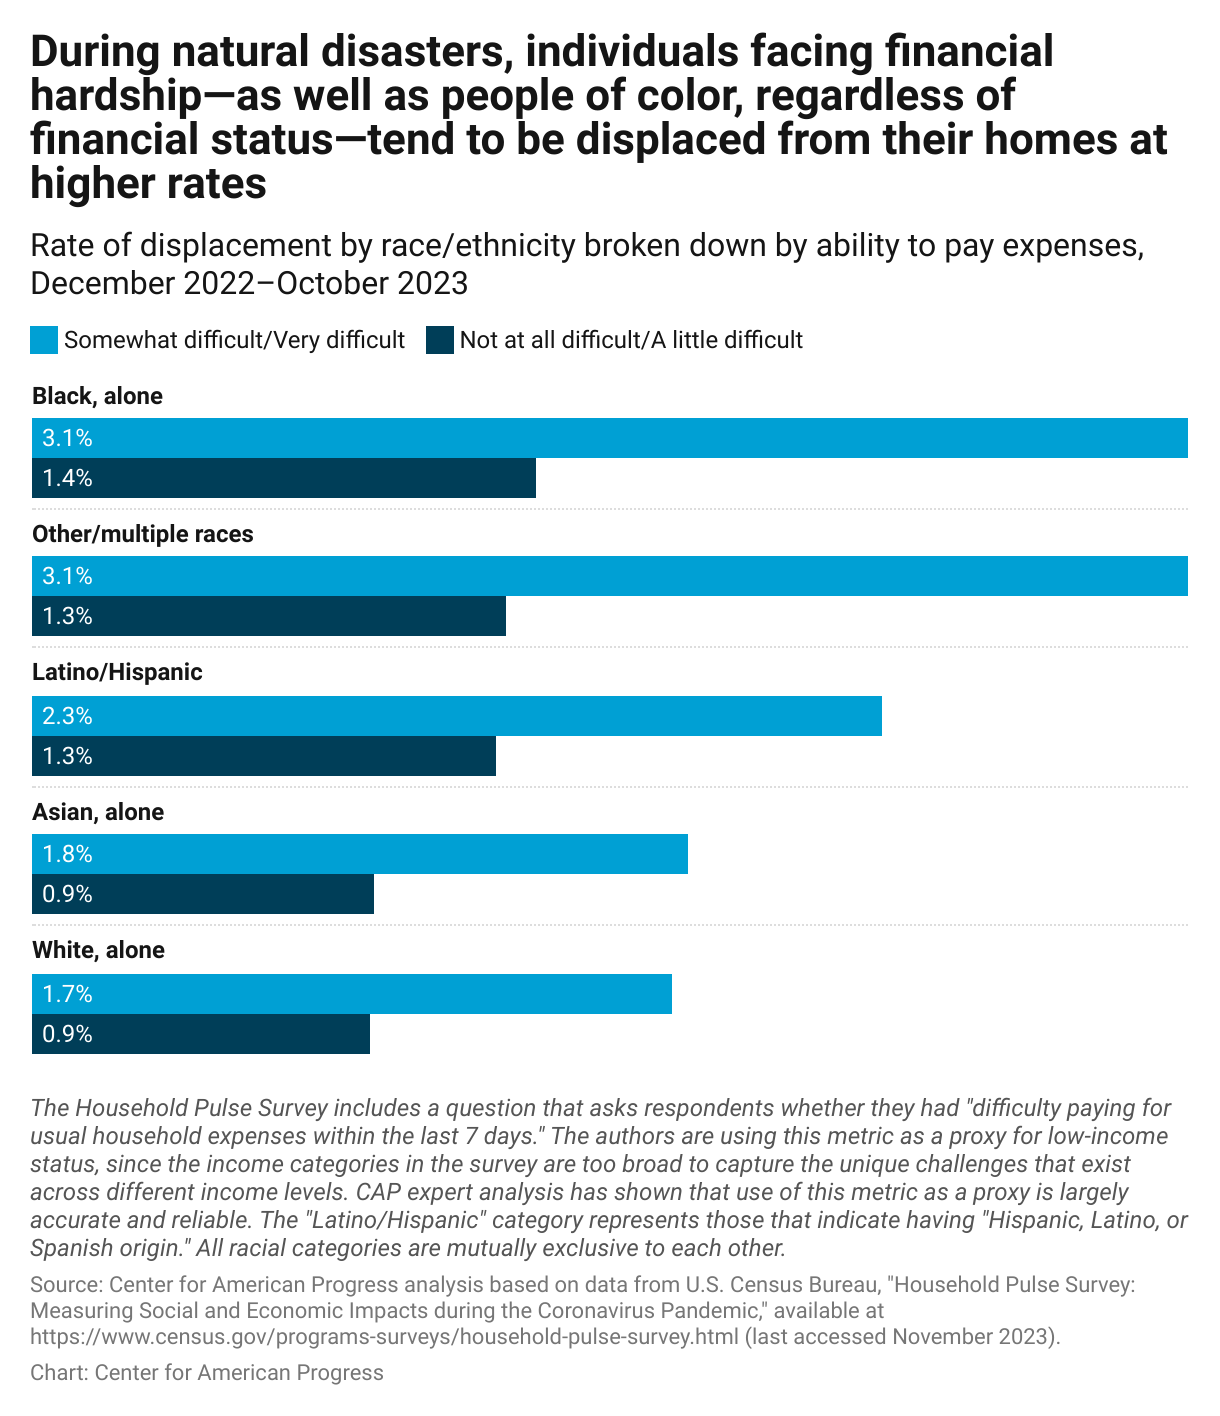 A clustered bar chart showing the rate of displacement by level of financial hardship, defined by "difficulty paying for usual household expenses."